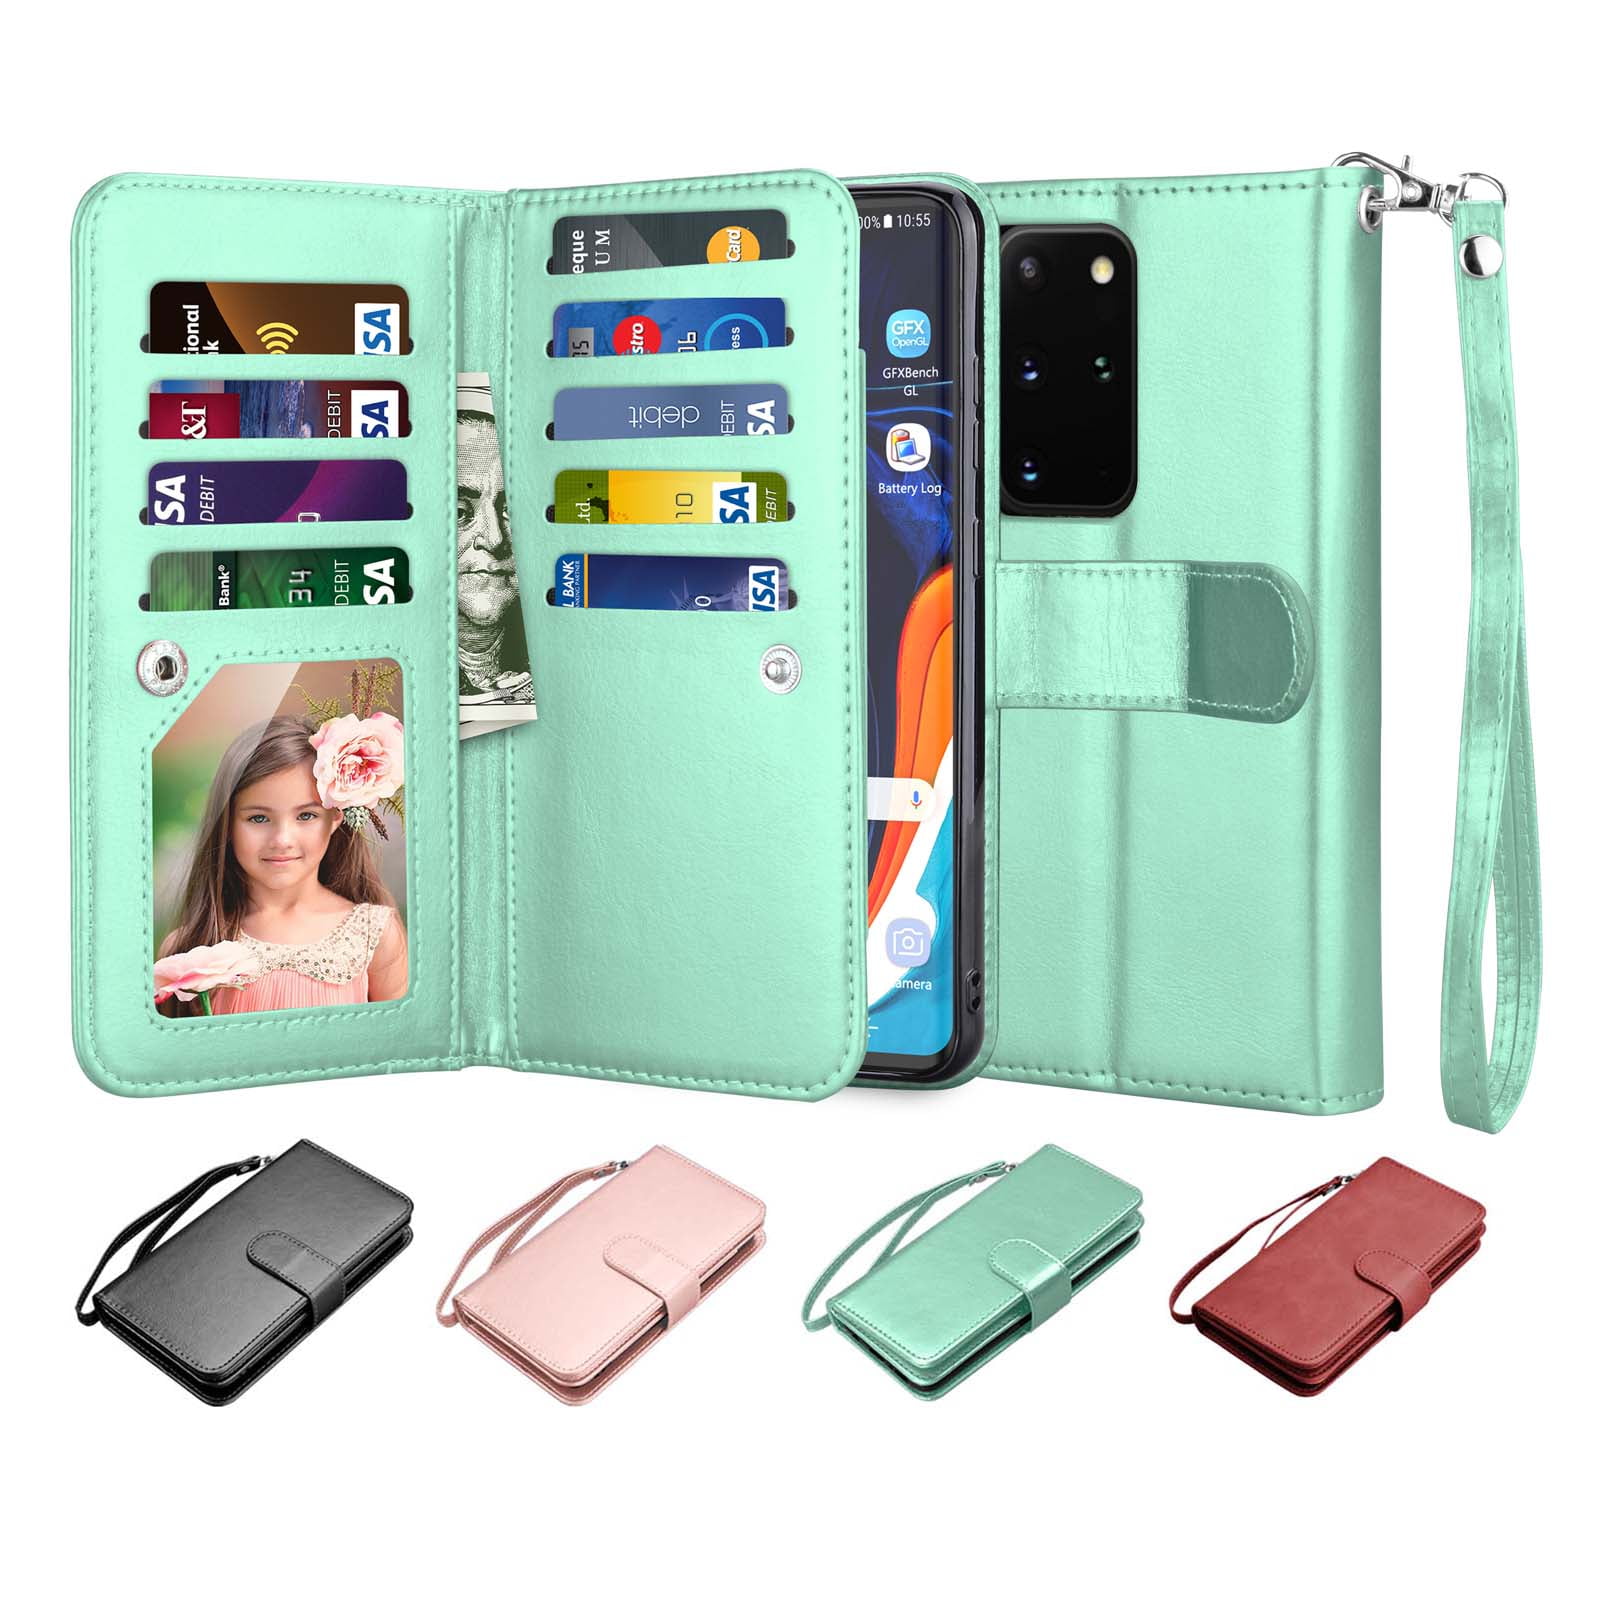 S5 Case Blue Korecase Premiun Wallet Leather Credit Card Holder Butterfly Flower Pattern Flip Folio Stand Case for Samsung Galaxy S5 NEO with a Wrist Strap